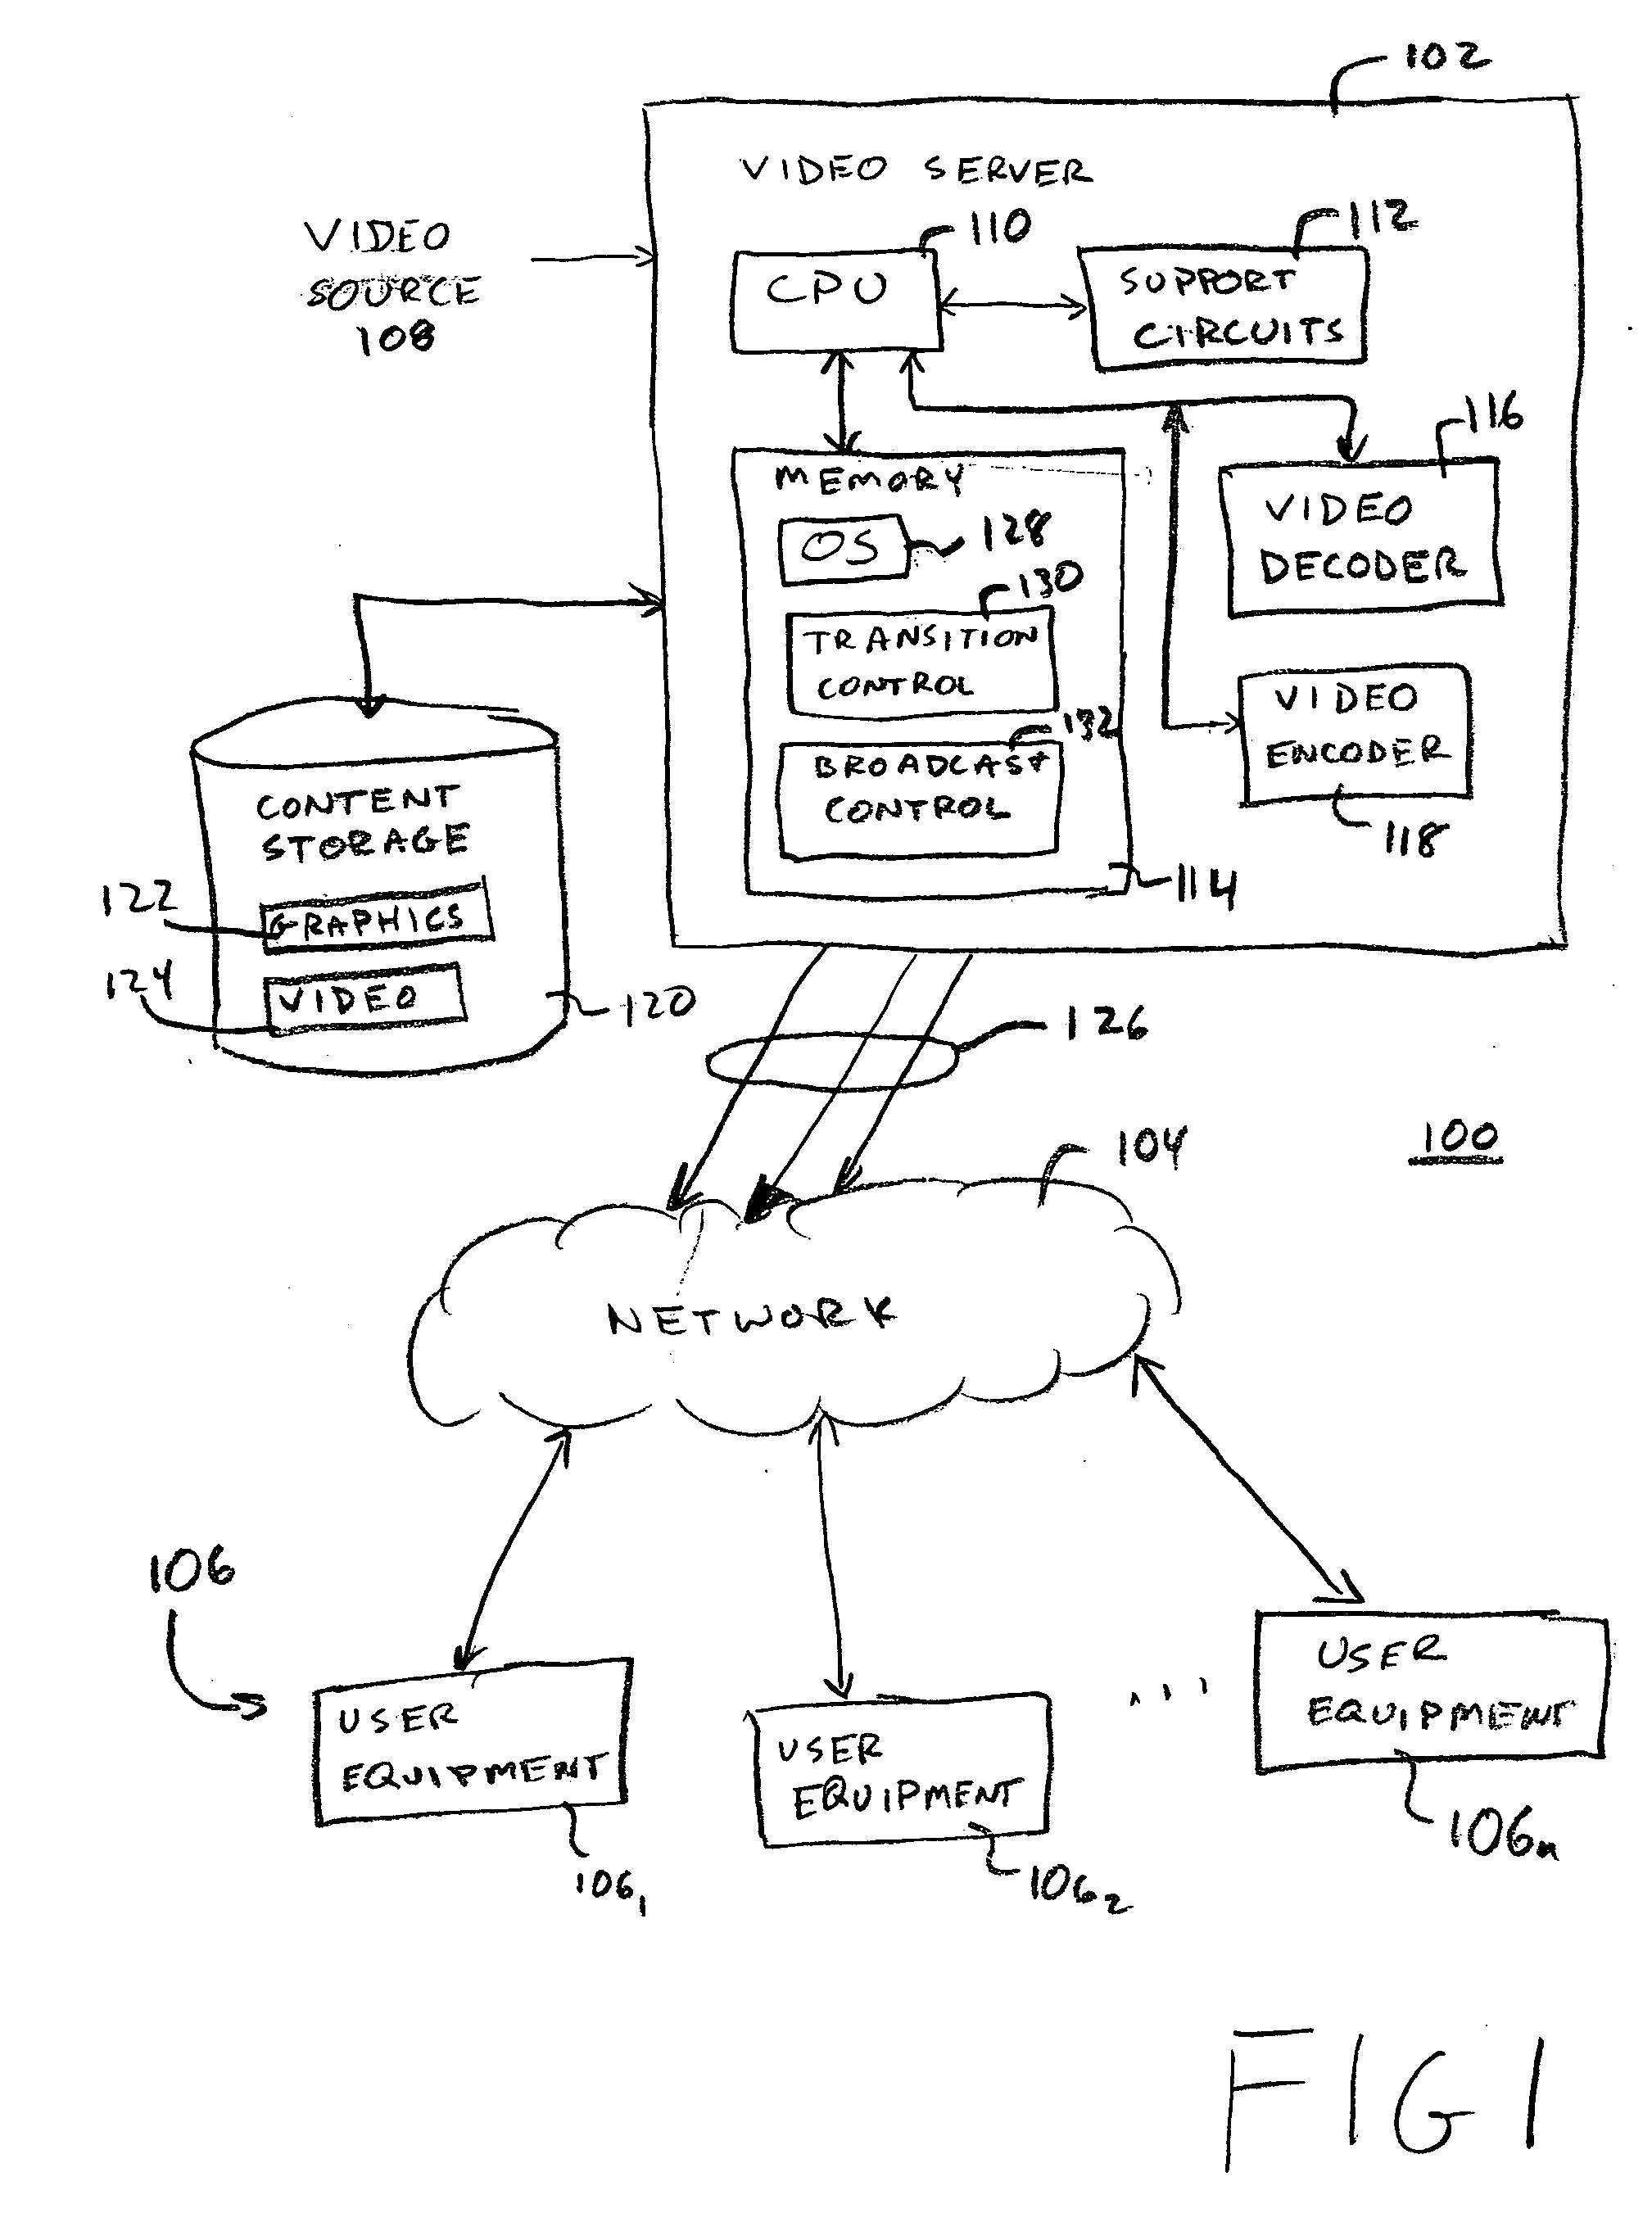 Method and apparatus for providing a transition between multimedia content